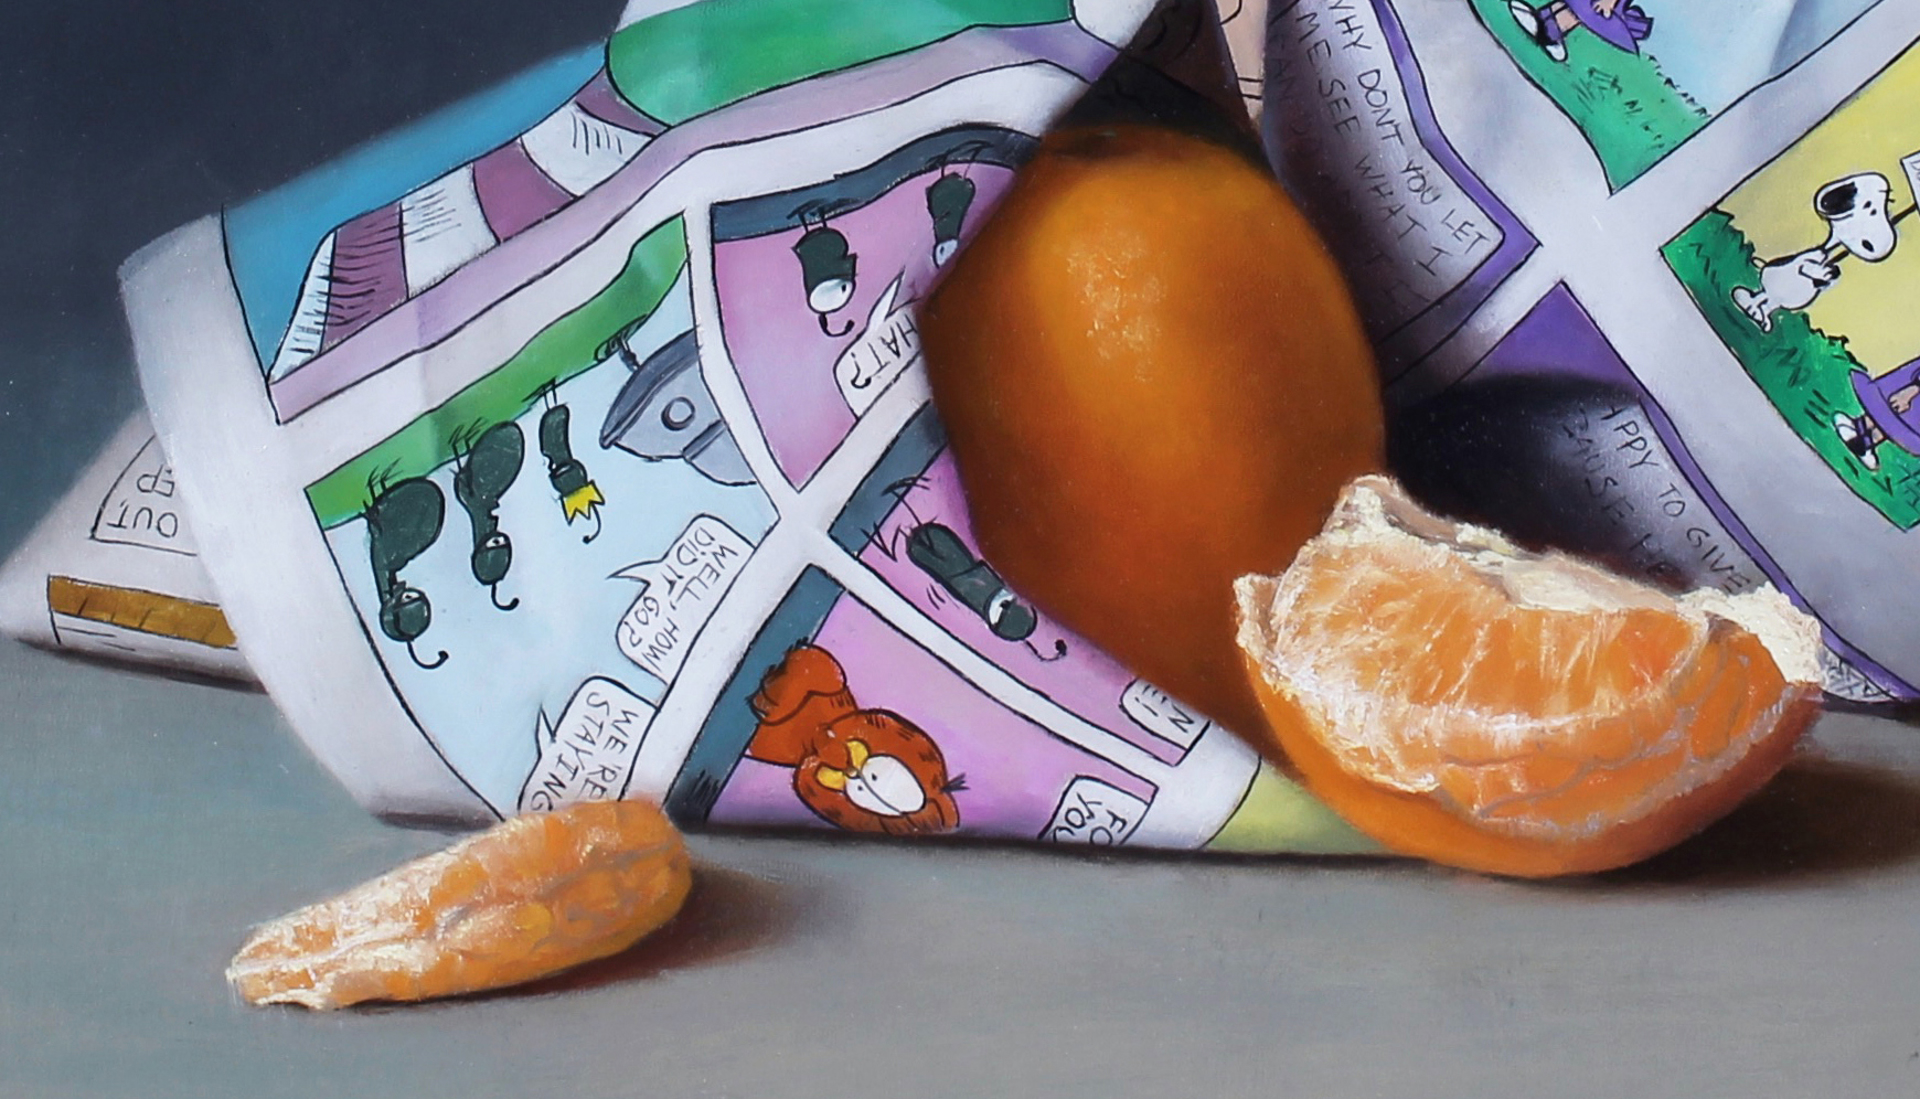 Clementines and Comics by Kelly Birkenruth